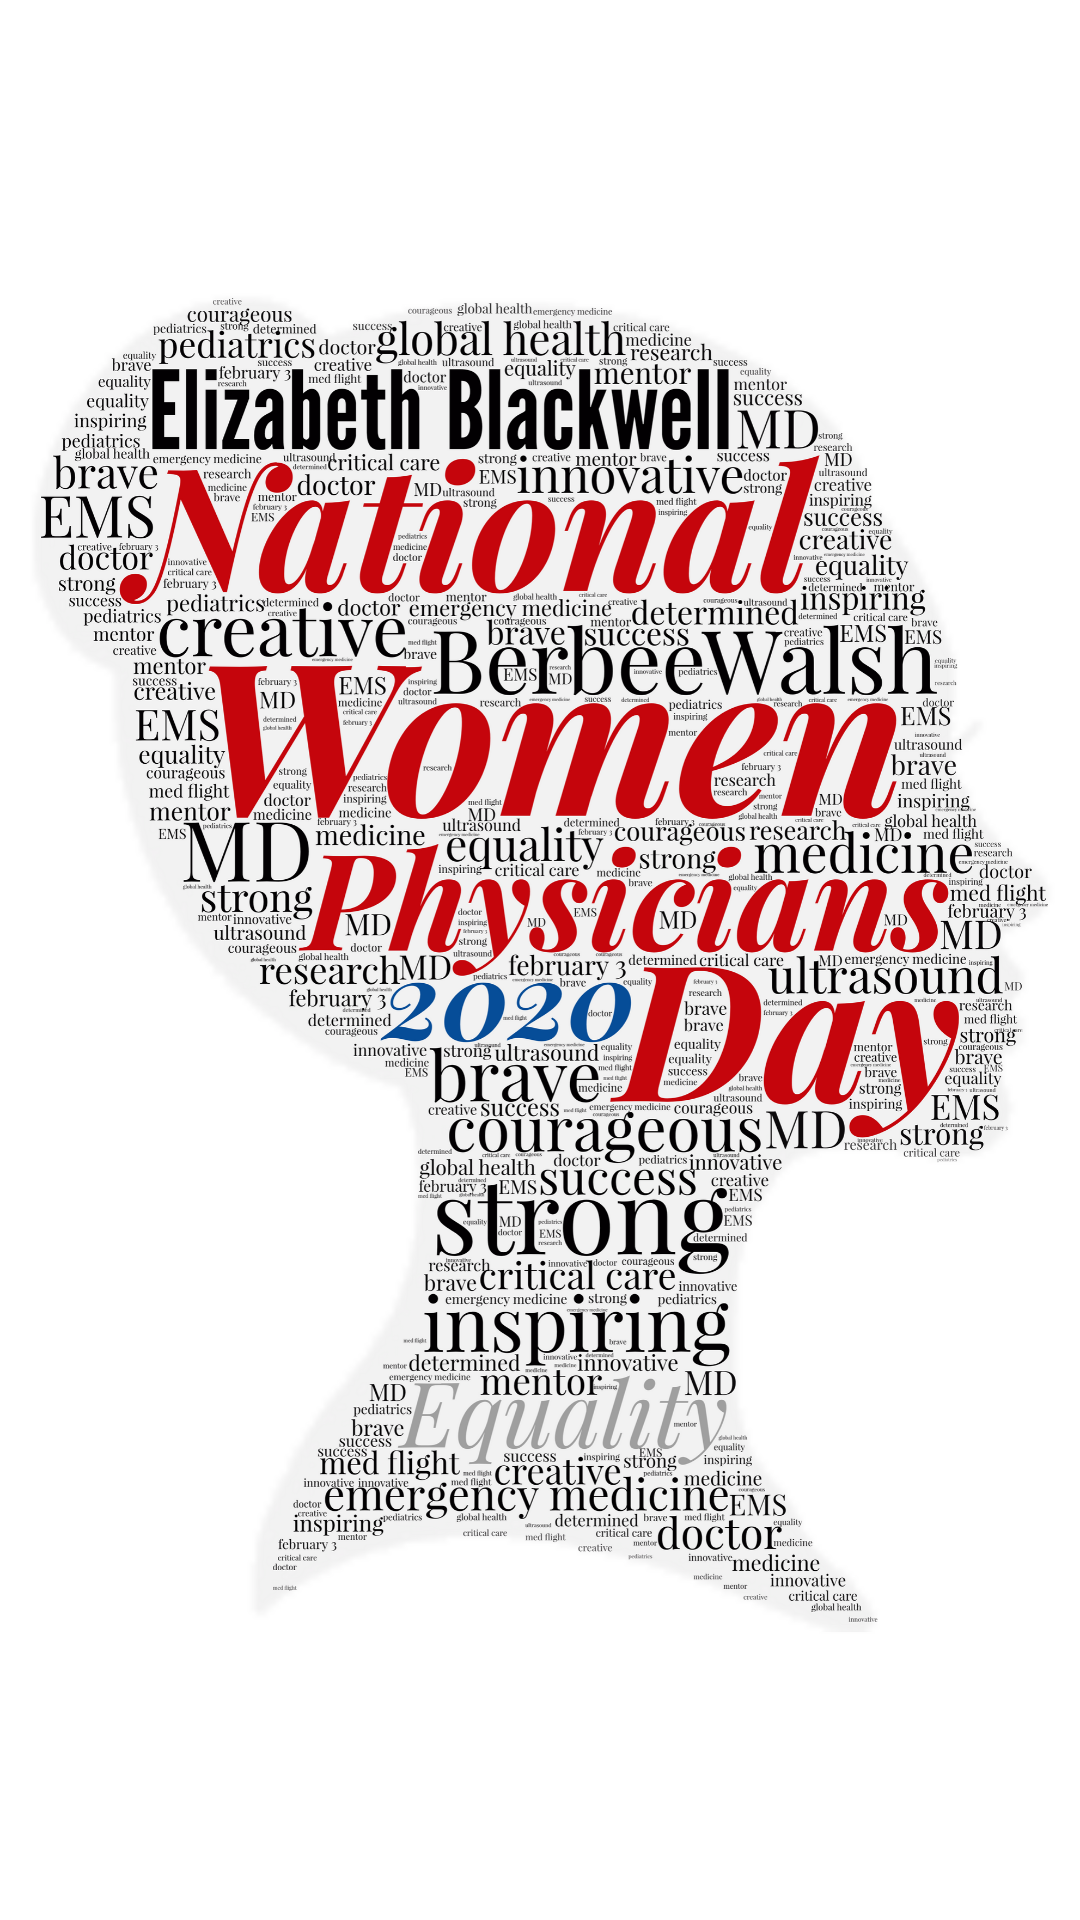 Feb. 3rd is National Women Physicians Day